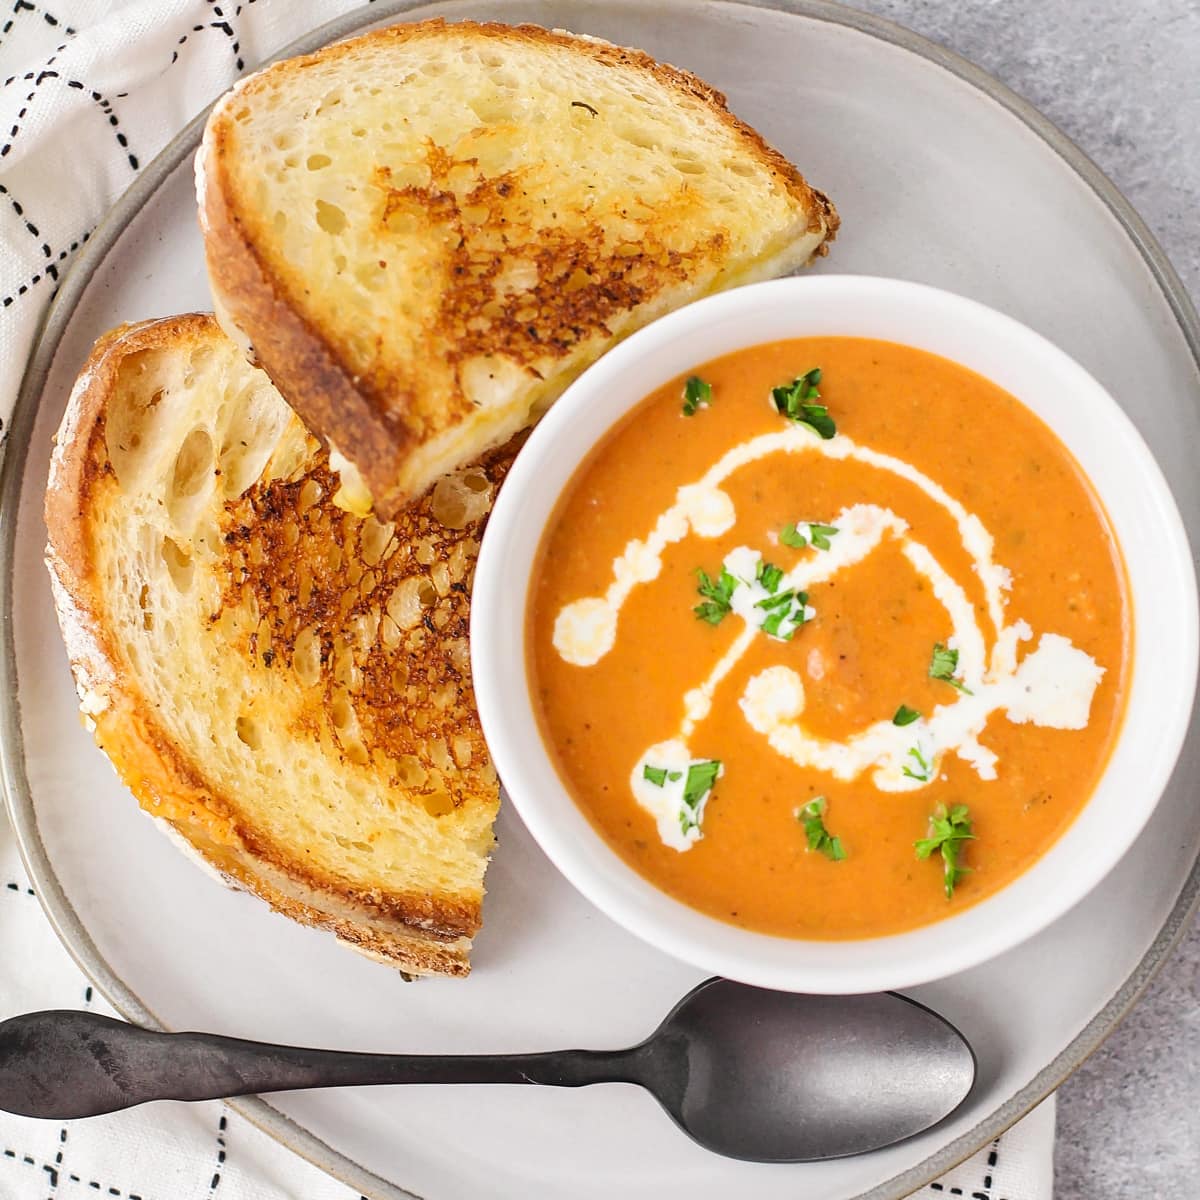 Tomato basil soup in bowl with grilled cheese on plate.